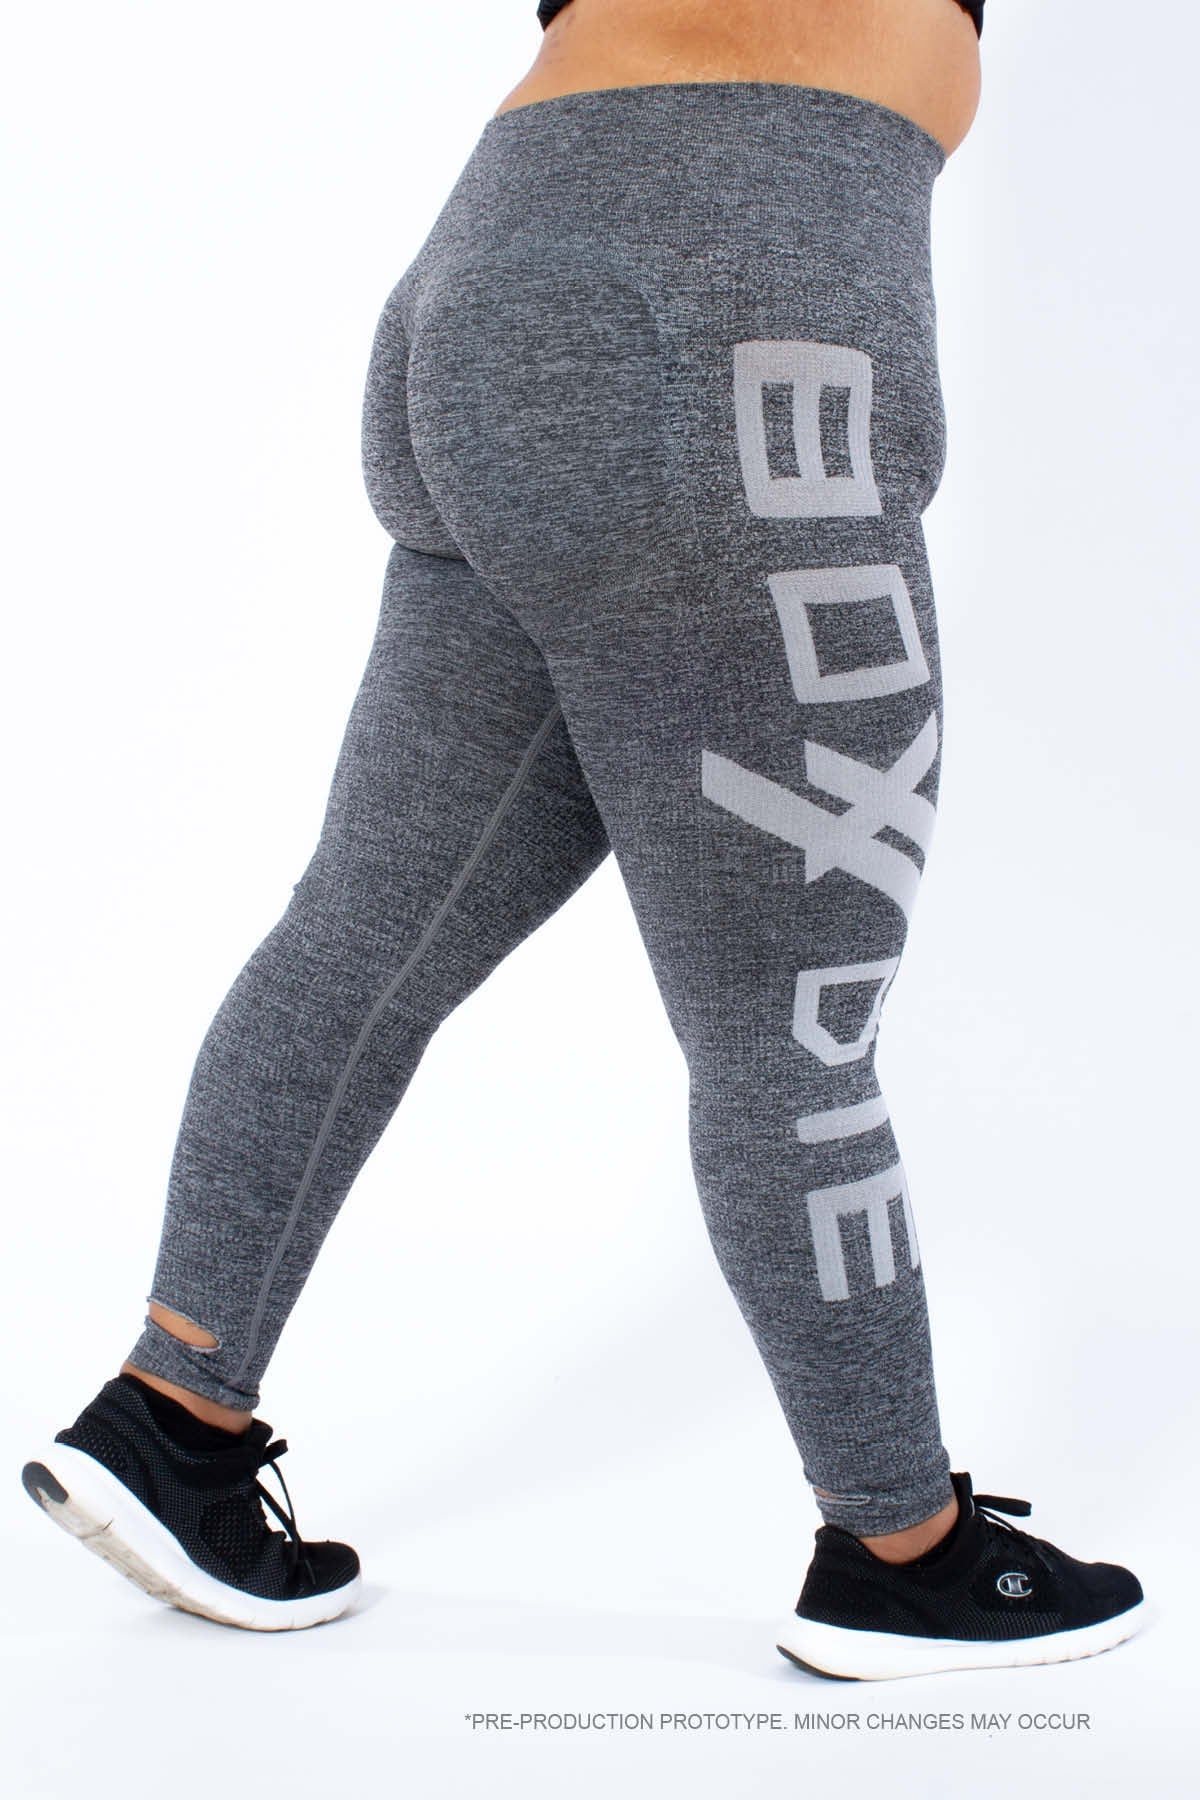 BODY CONTOURING LEGGING WITH KNEE AND WAIST SUPPORT